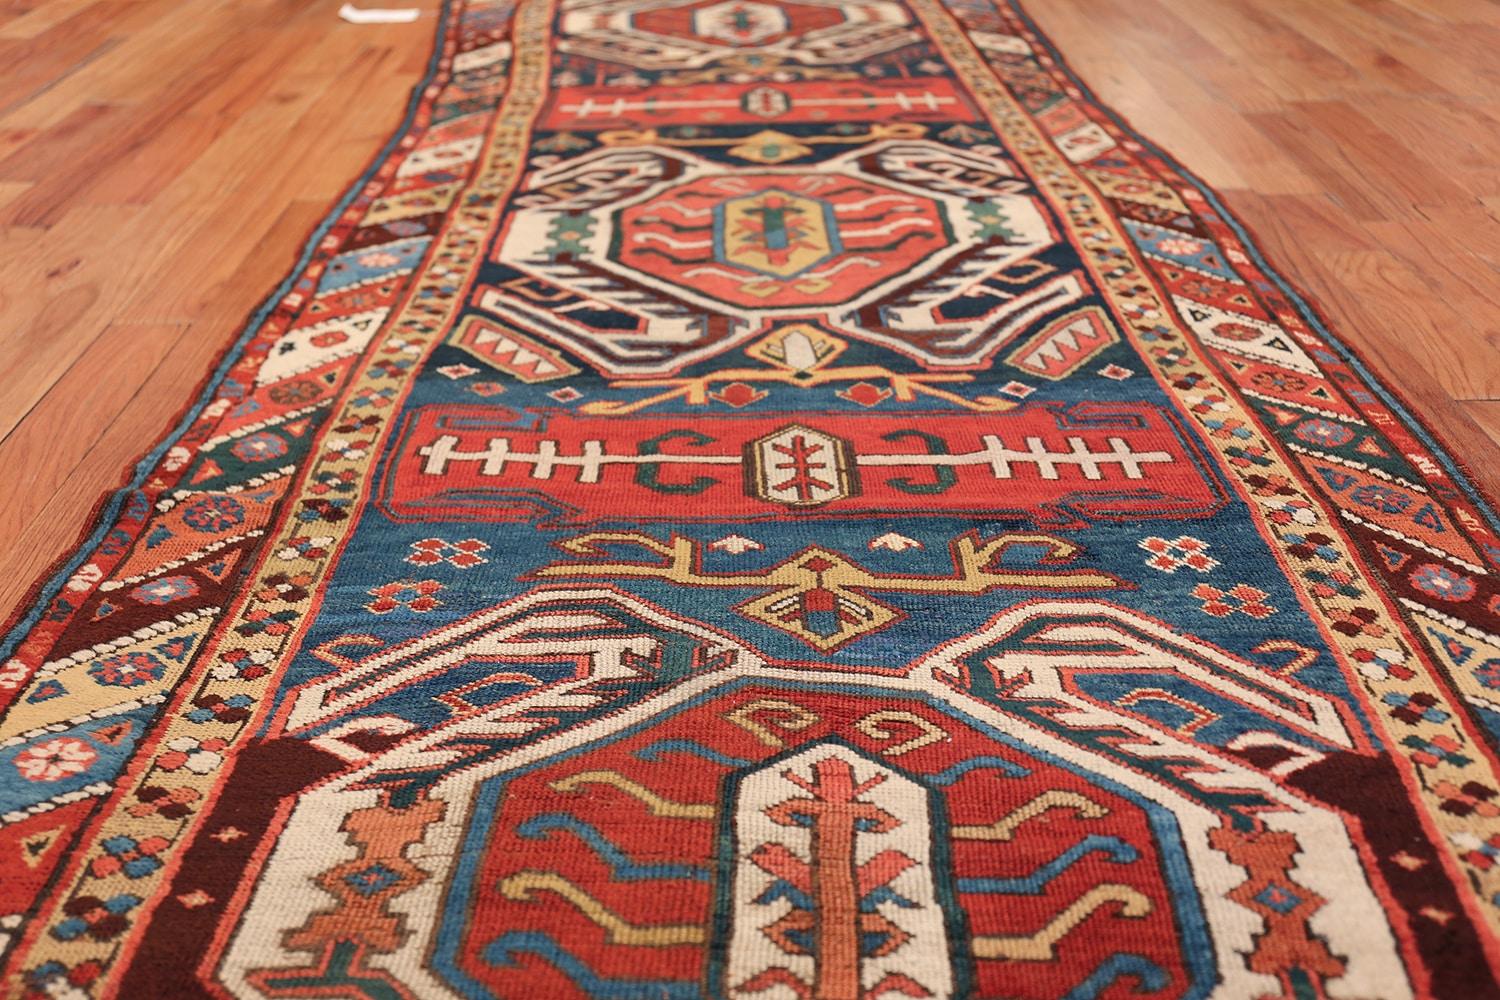 Beautiful Tribal design antique Caucasian Lankoran runner rug, country of origin / rug type: Caucasian rugs, circa 1900. Size: 3 ft 5 in x 11 ft (1.04 m x 3.35 m)

This bold, antique Caucasian rug is filled in with bright red, black, yellow and